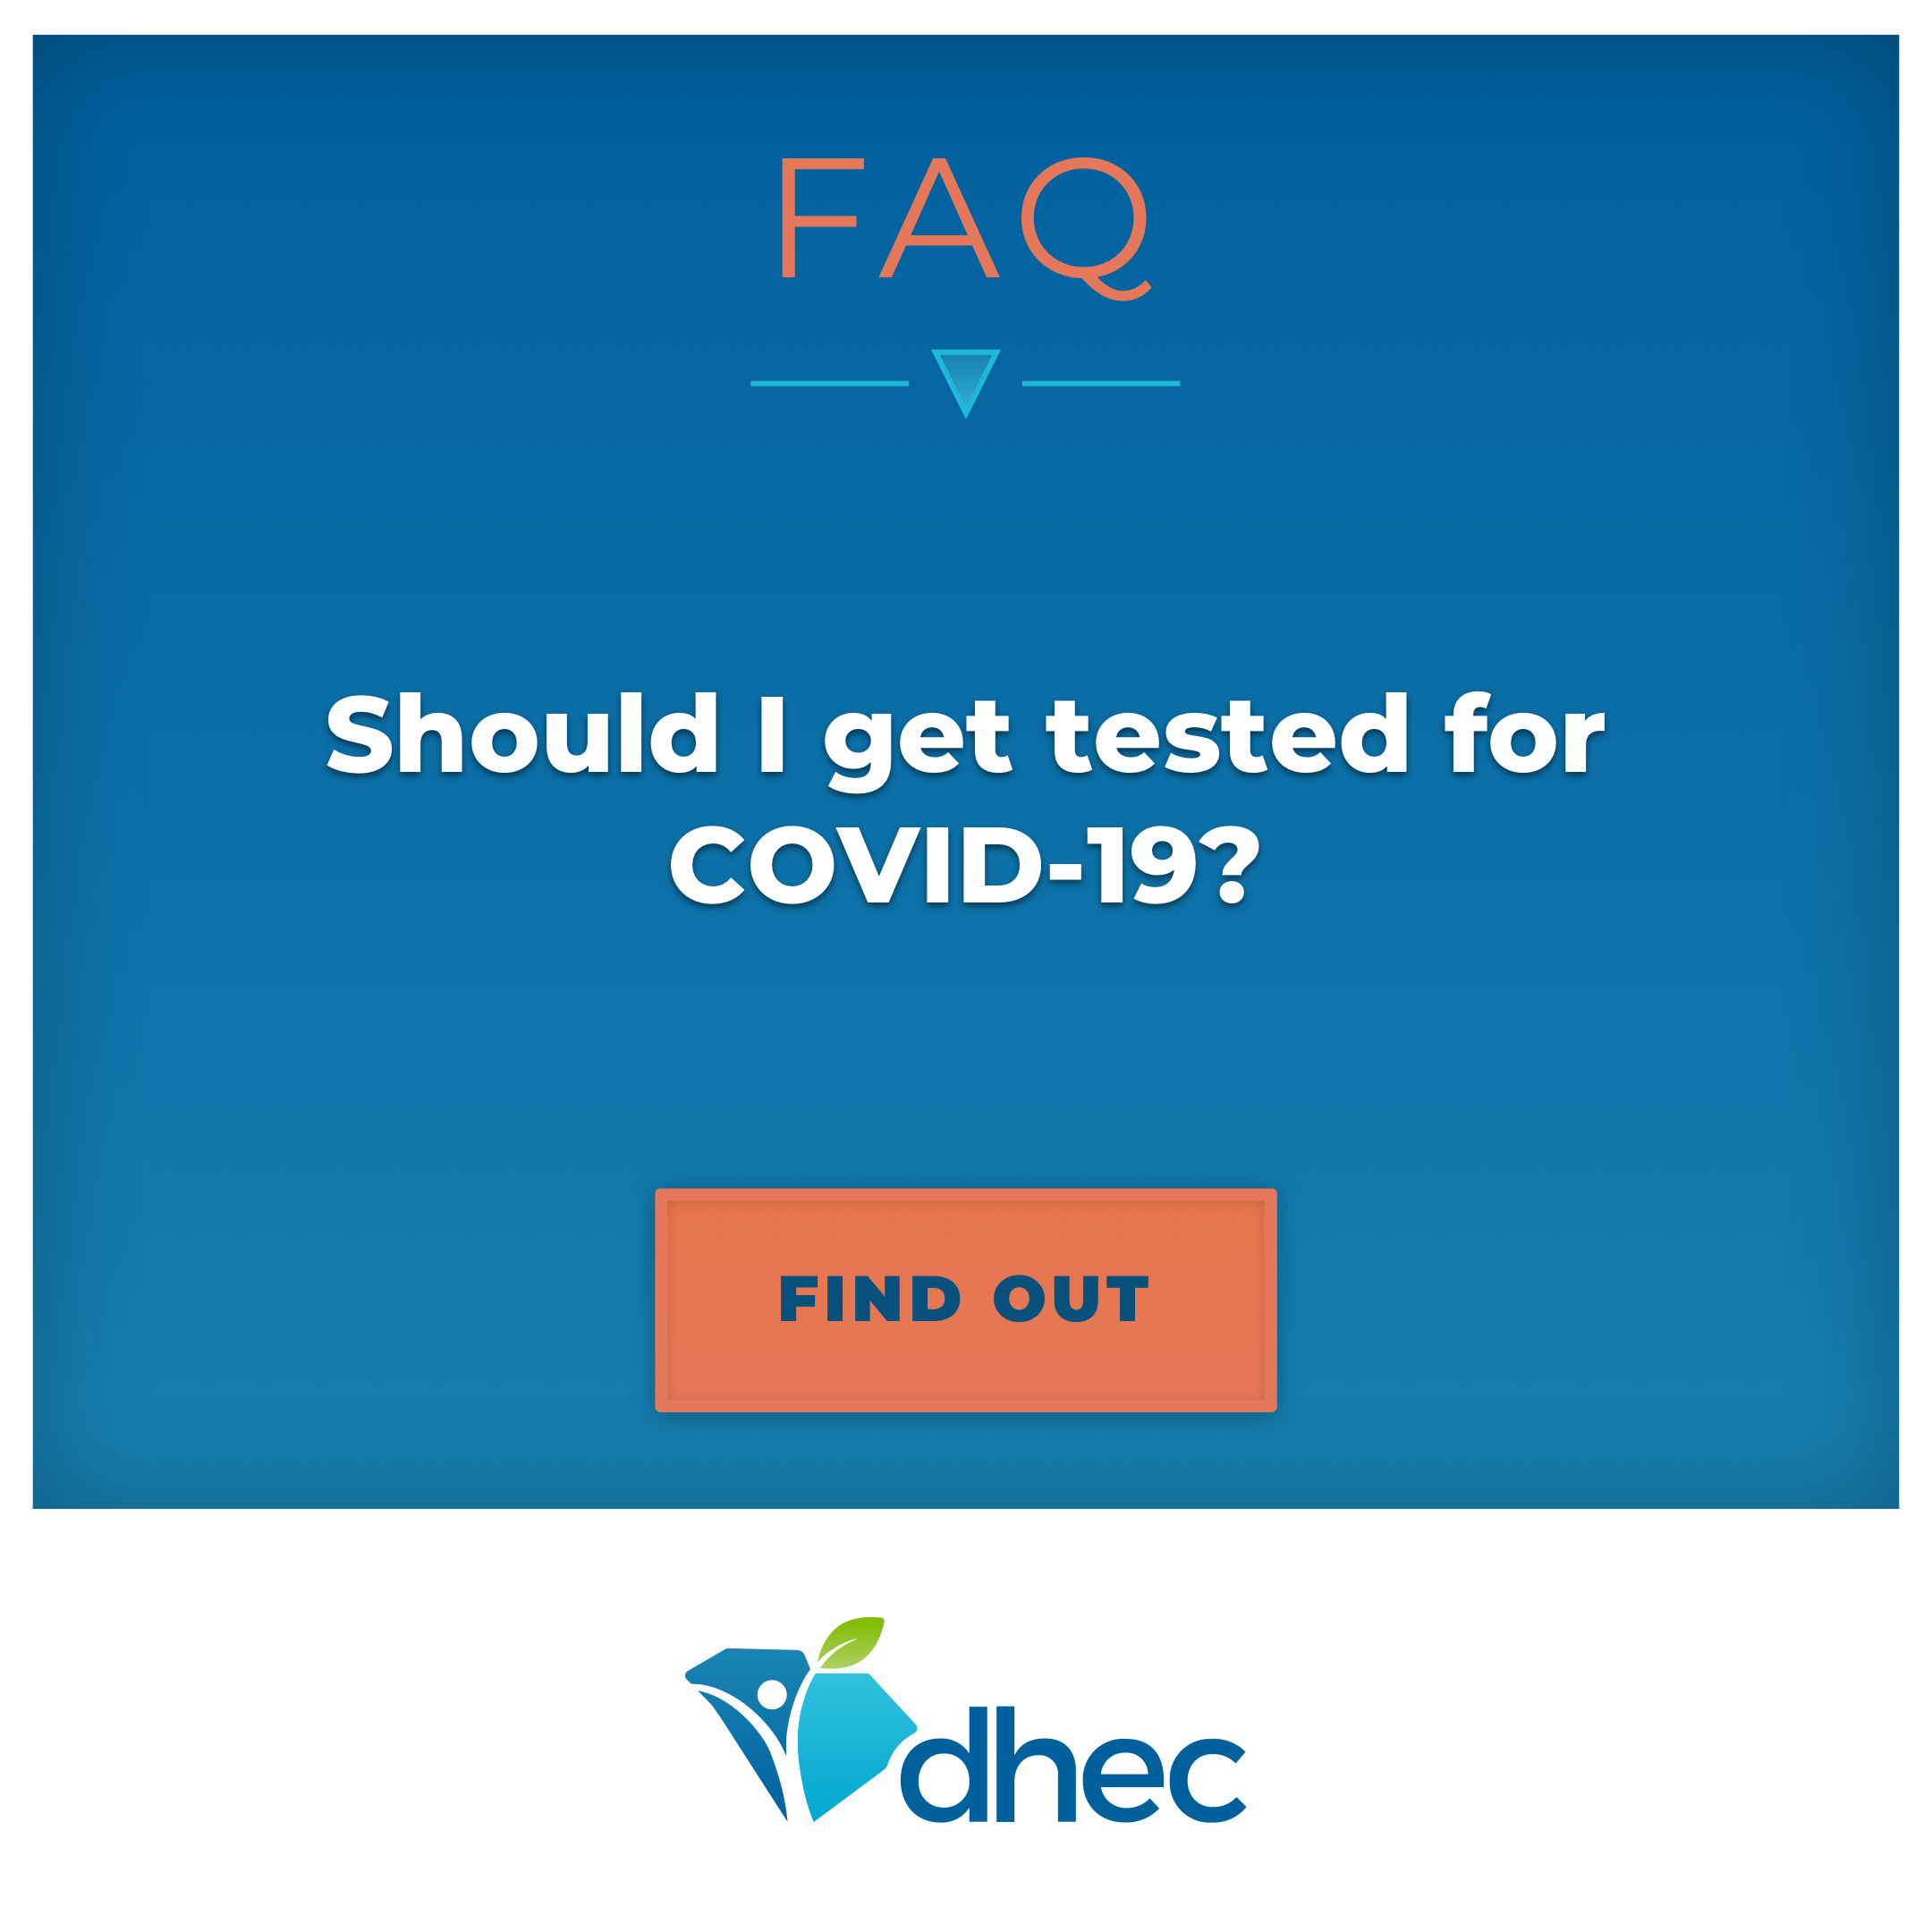 Should I get tested for COVID-19?